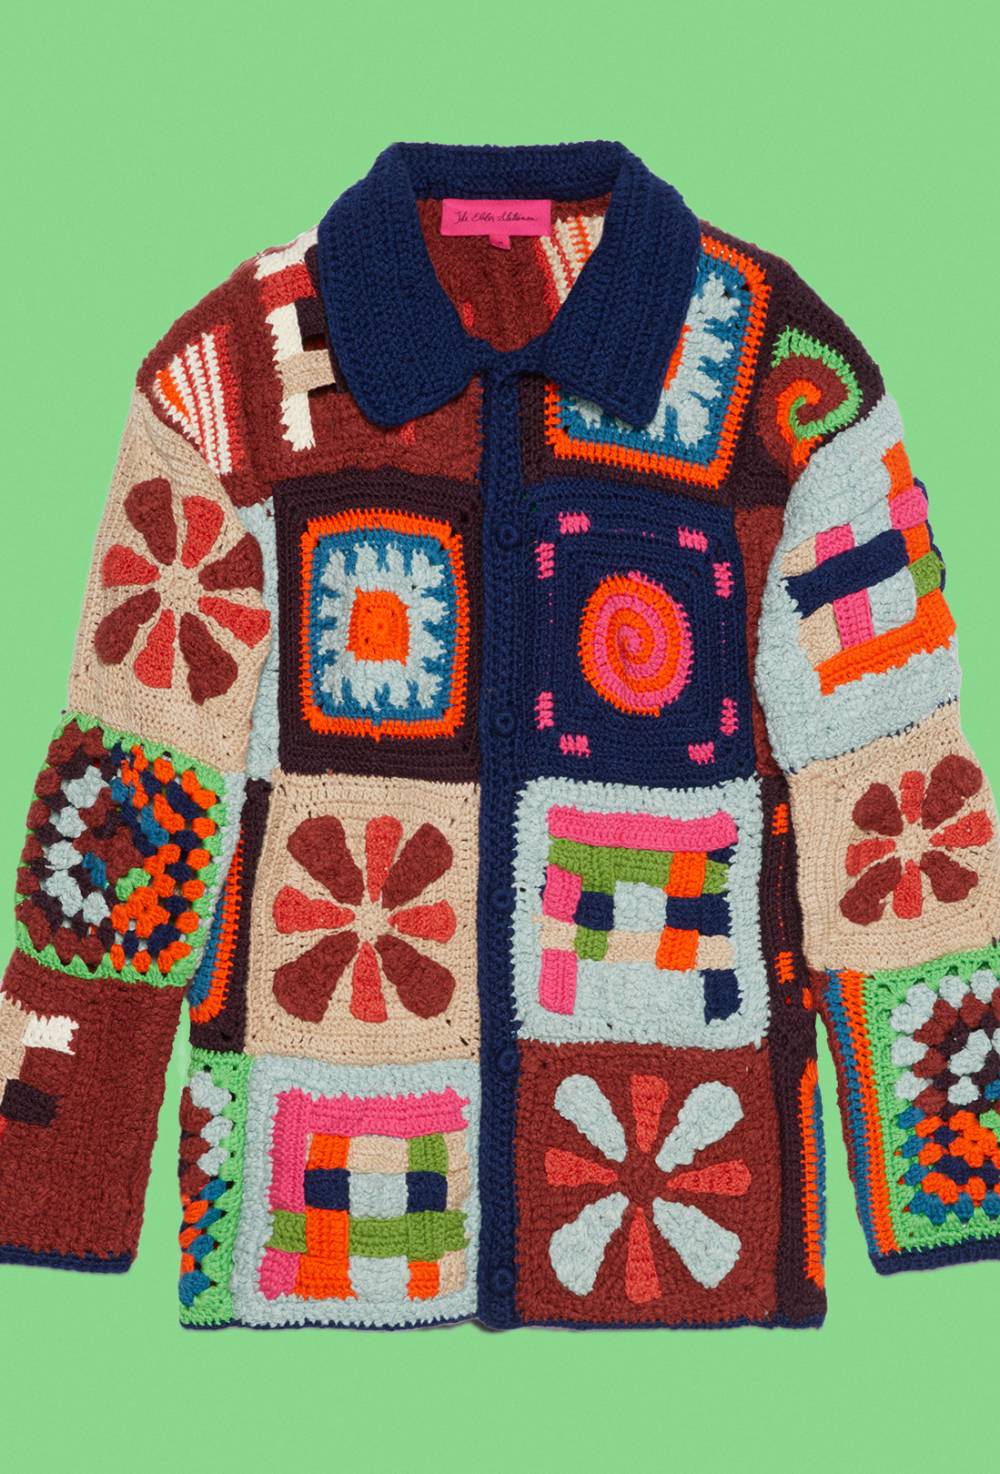 Great granny square shirt by The Elder Statesman  image #1